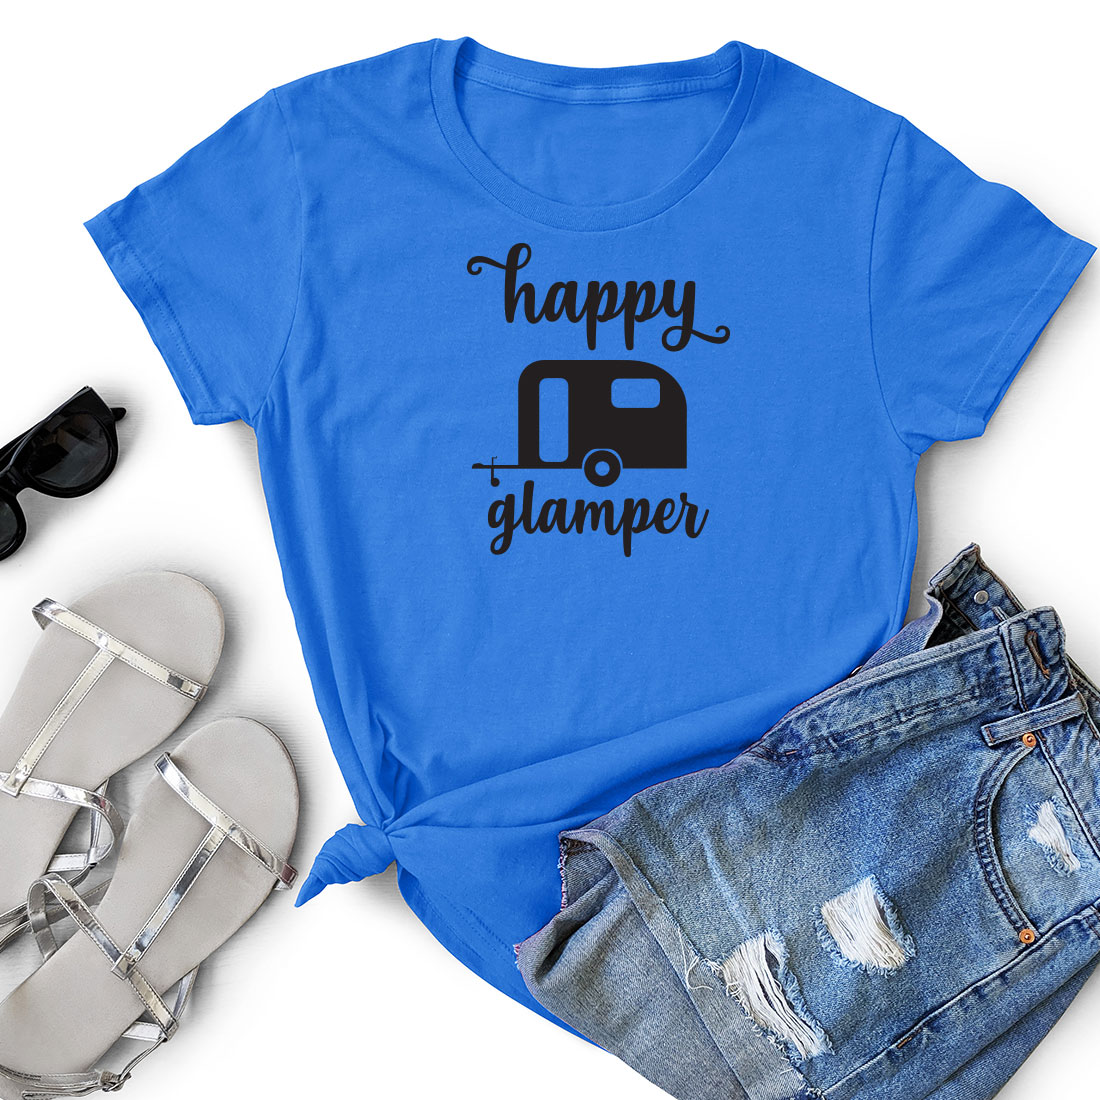 T - shirt that says happy glamper next to a pair of shorts.